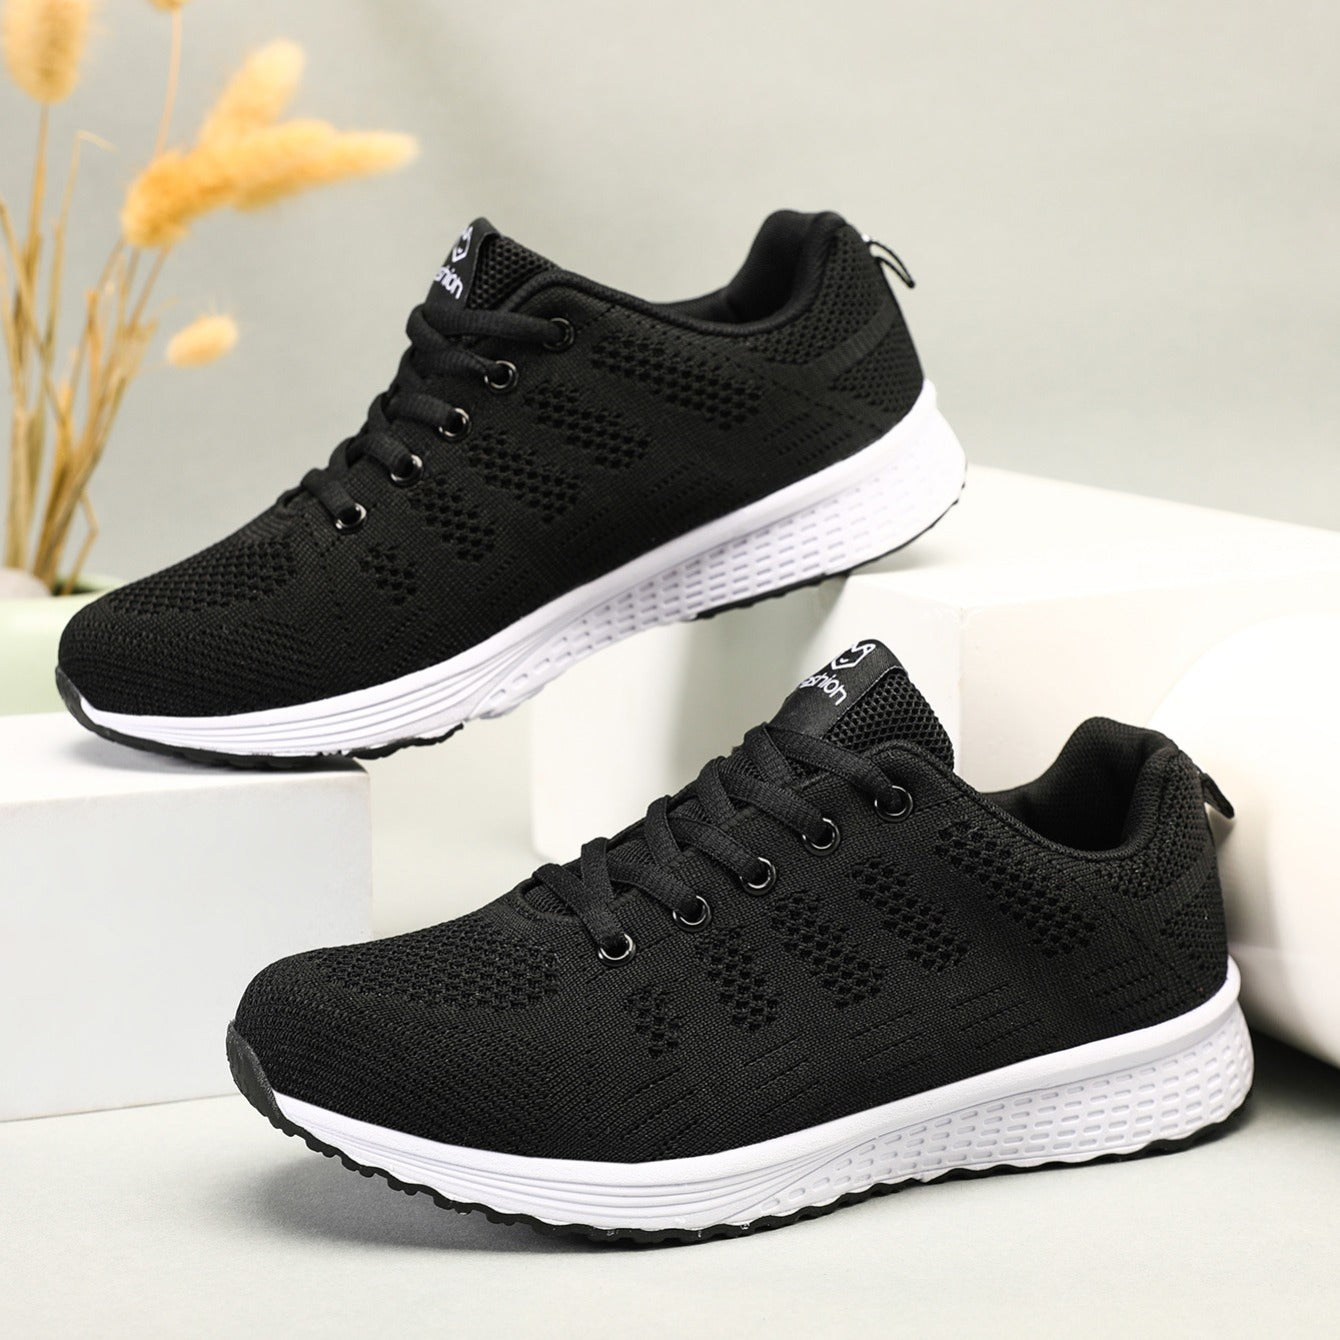 「lovevop」Women's Leisure Knit Sneakers, Lightweight Low Top Lace Up Solid Color Casual Shoes, Women's Running Shoes